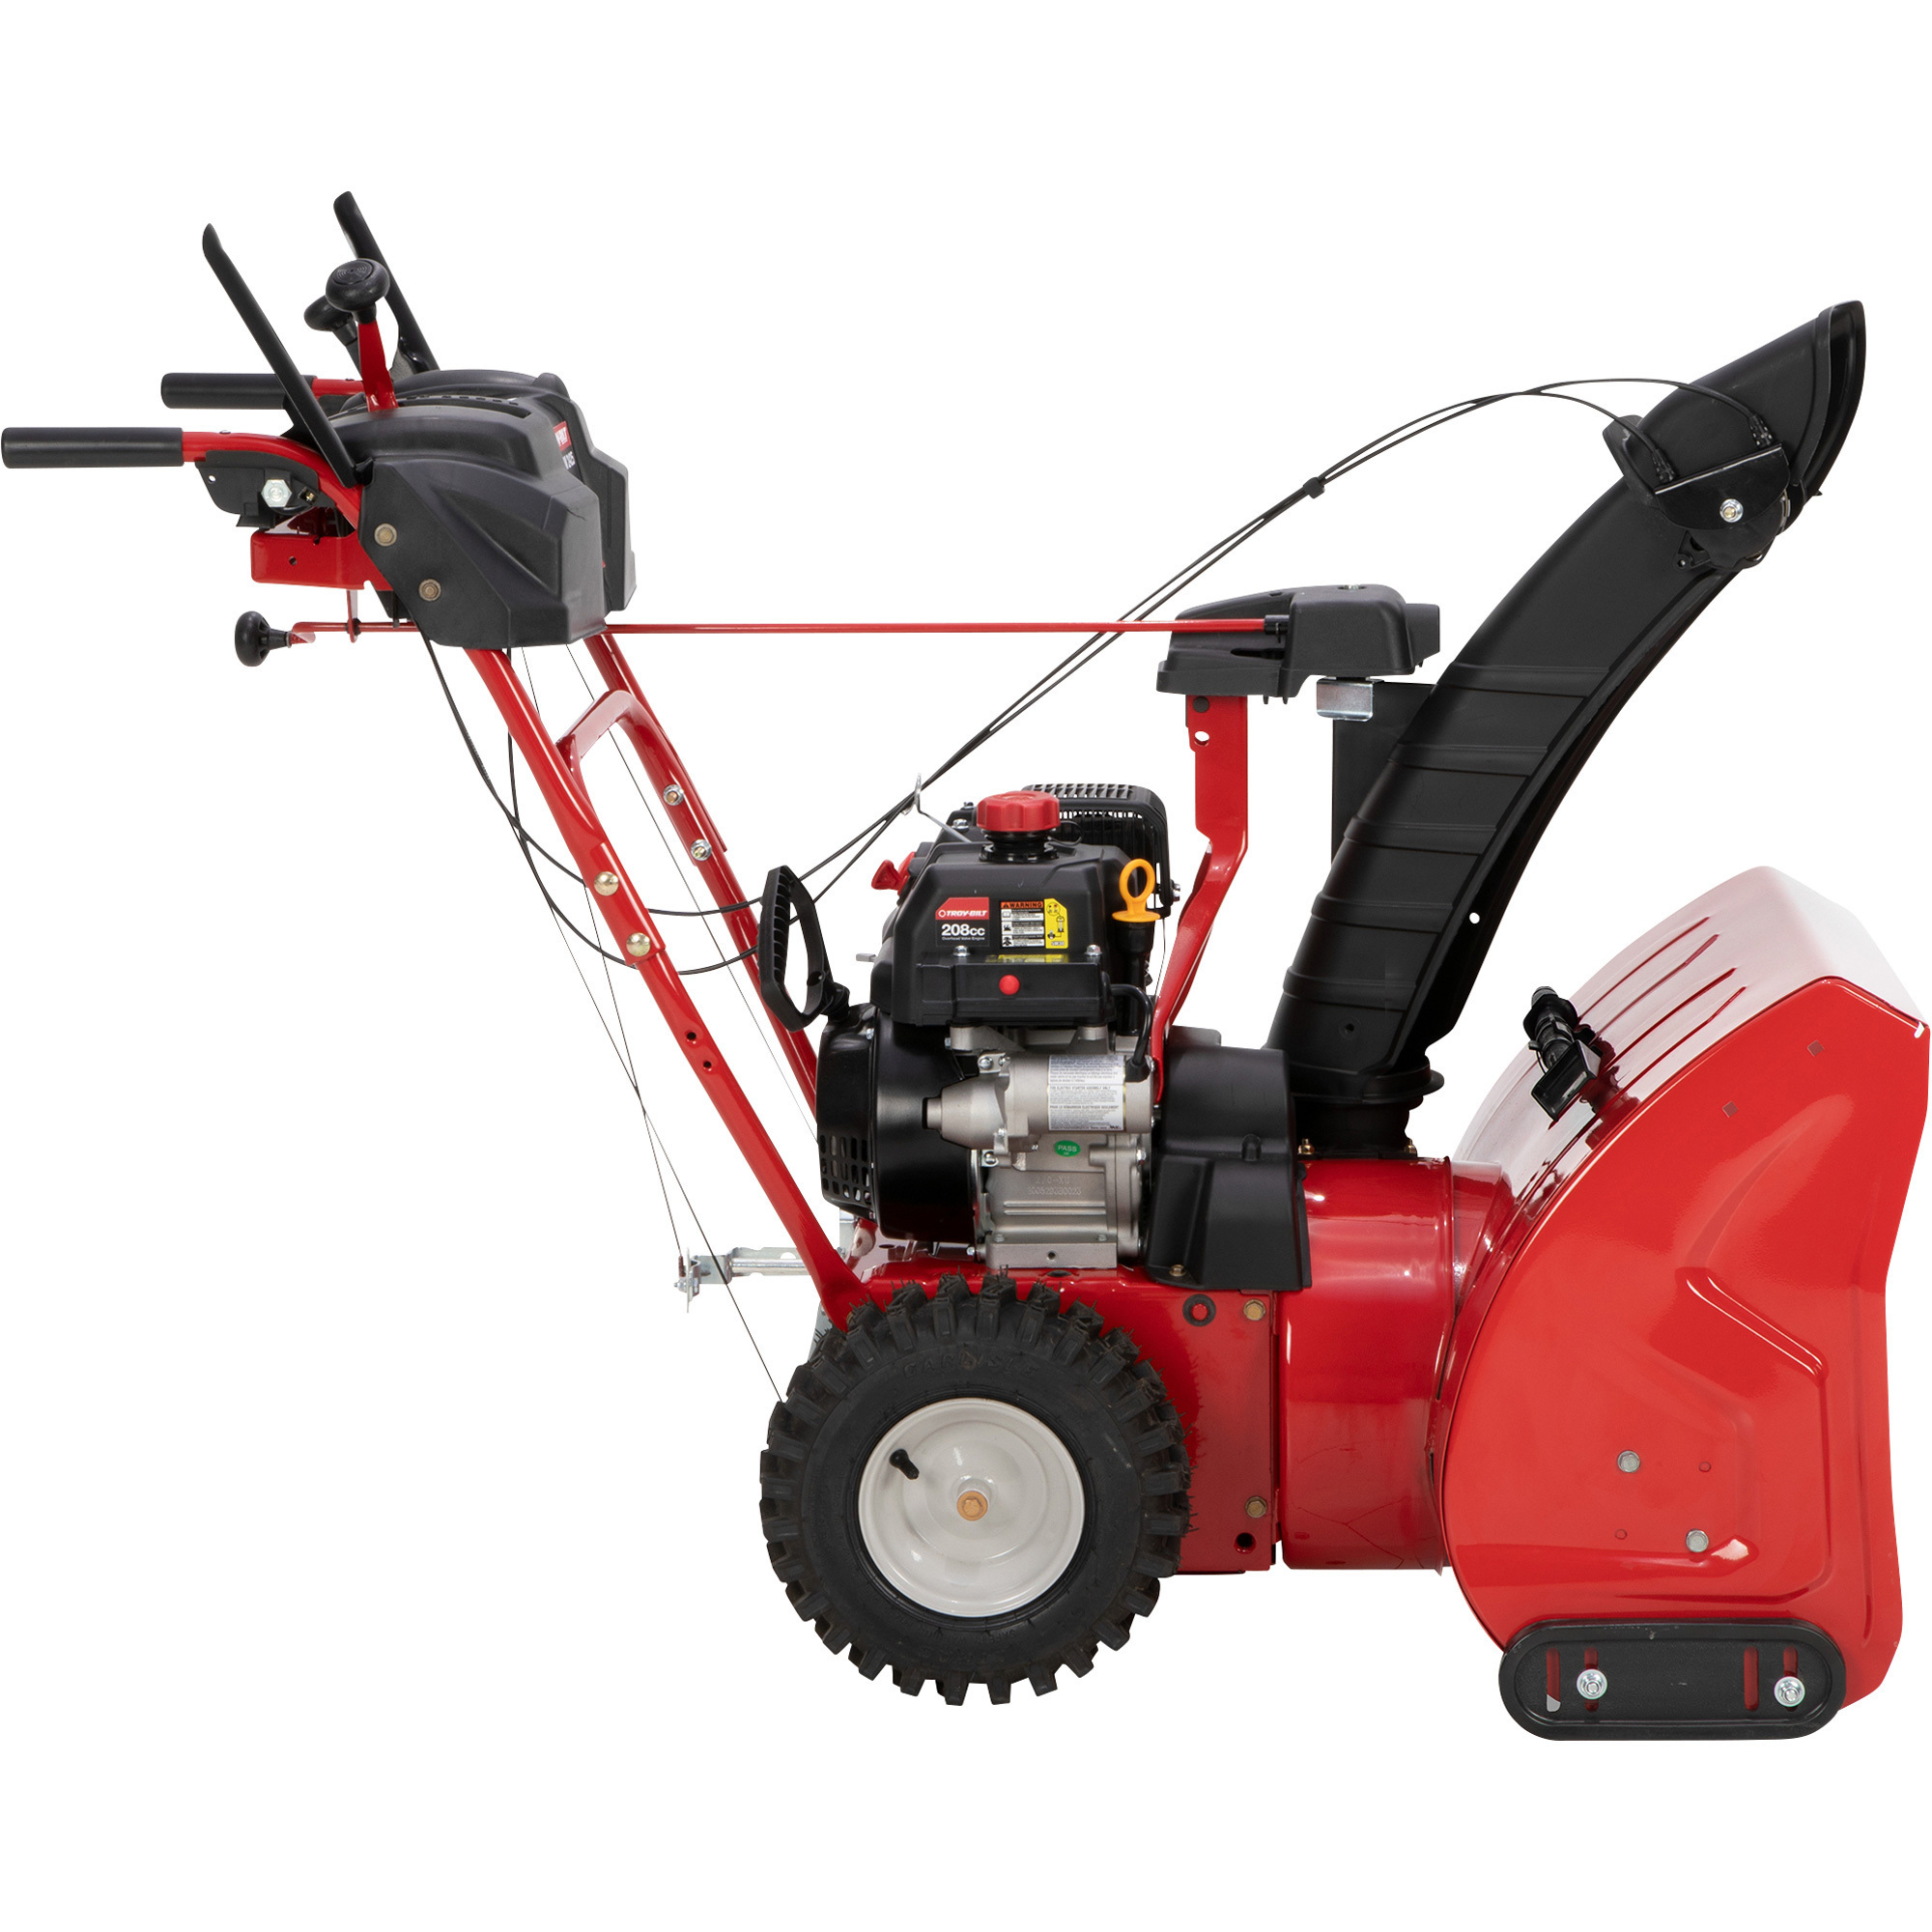 Storm 2425 2-Stage Self-Propelled Snow Thrower with Electric Start, 24Inch, 208cc, Model - Troy-Bilt 31BS6KM2B66